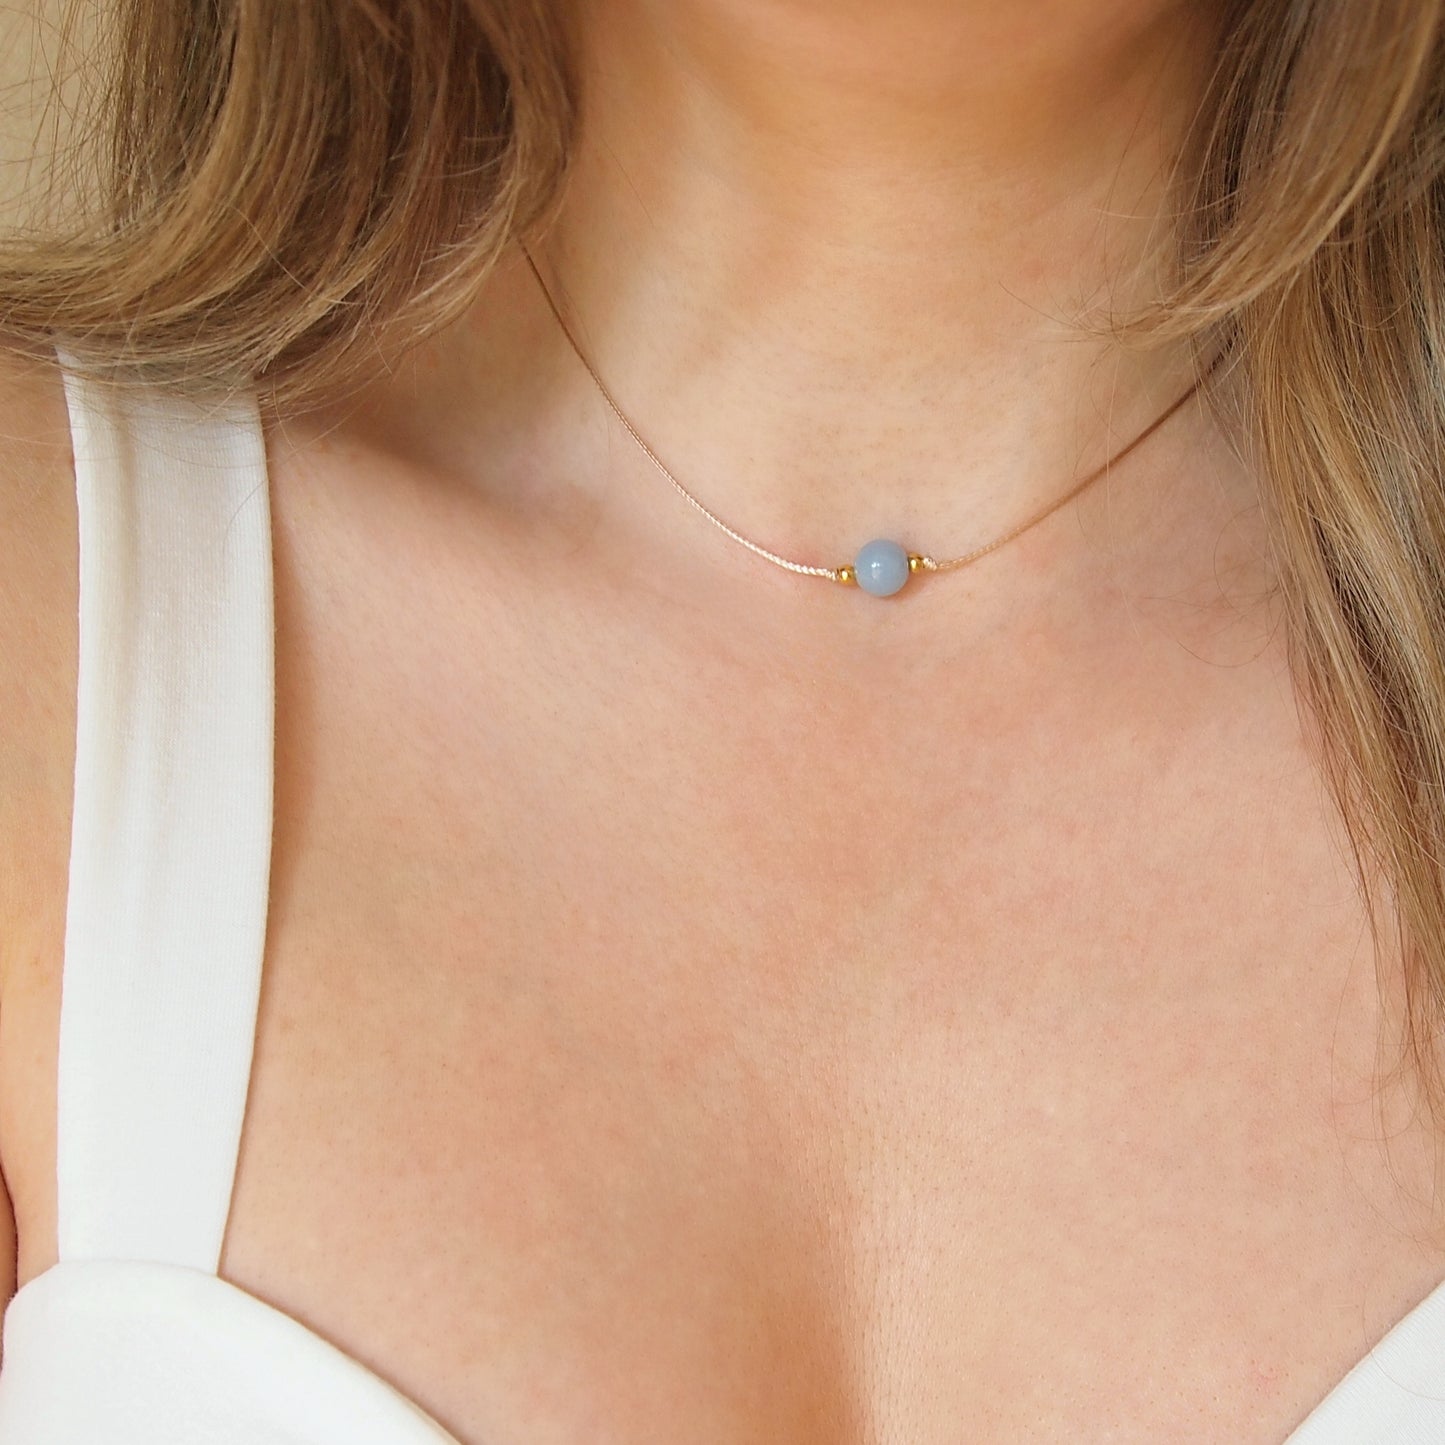 simple angelite choker, crown chakra necklace